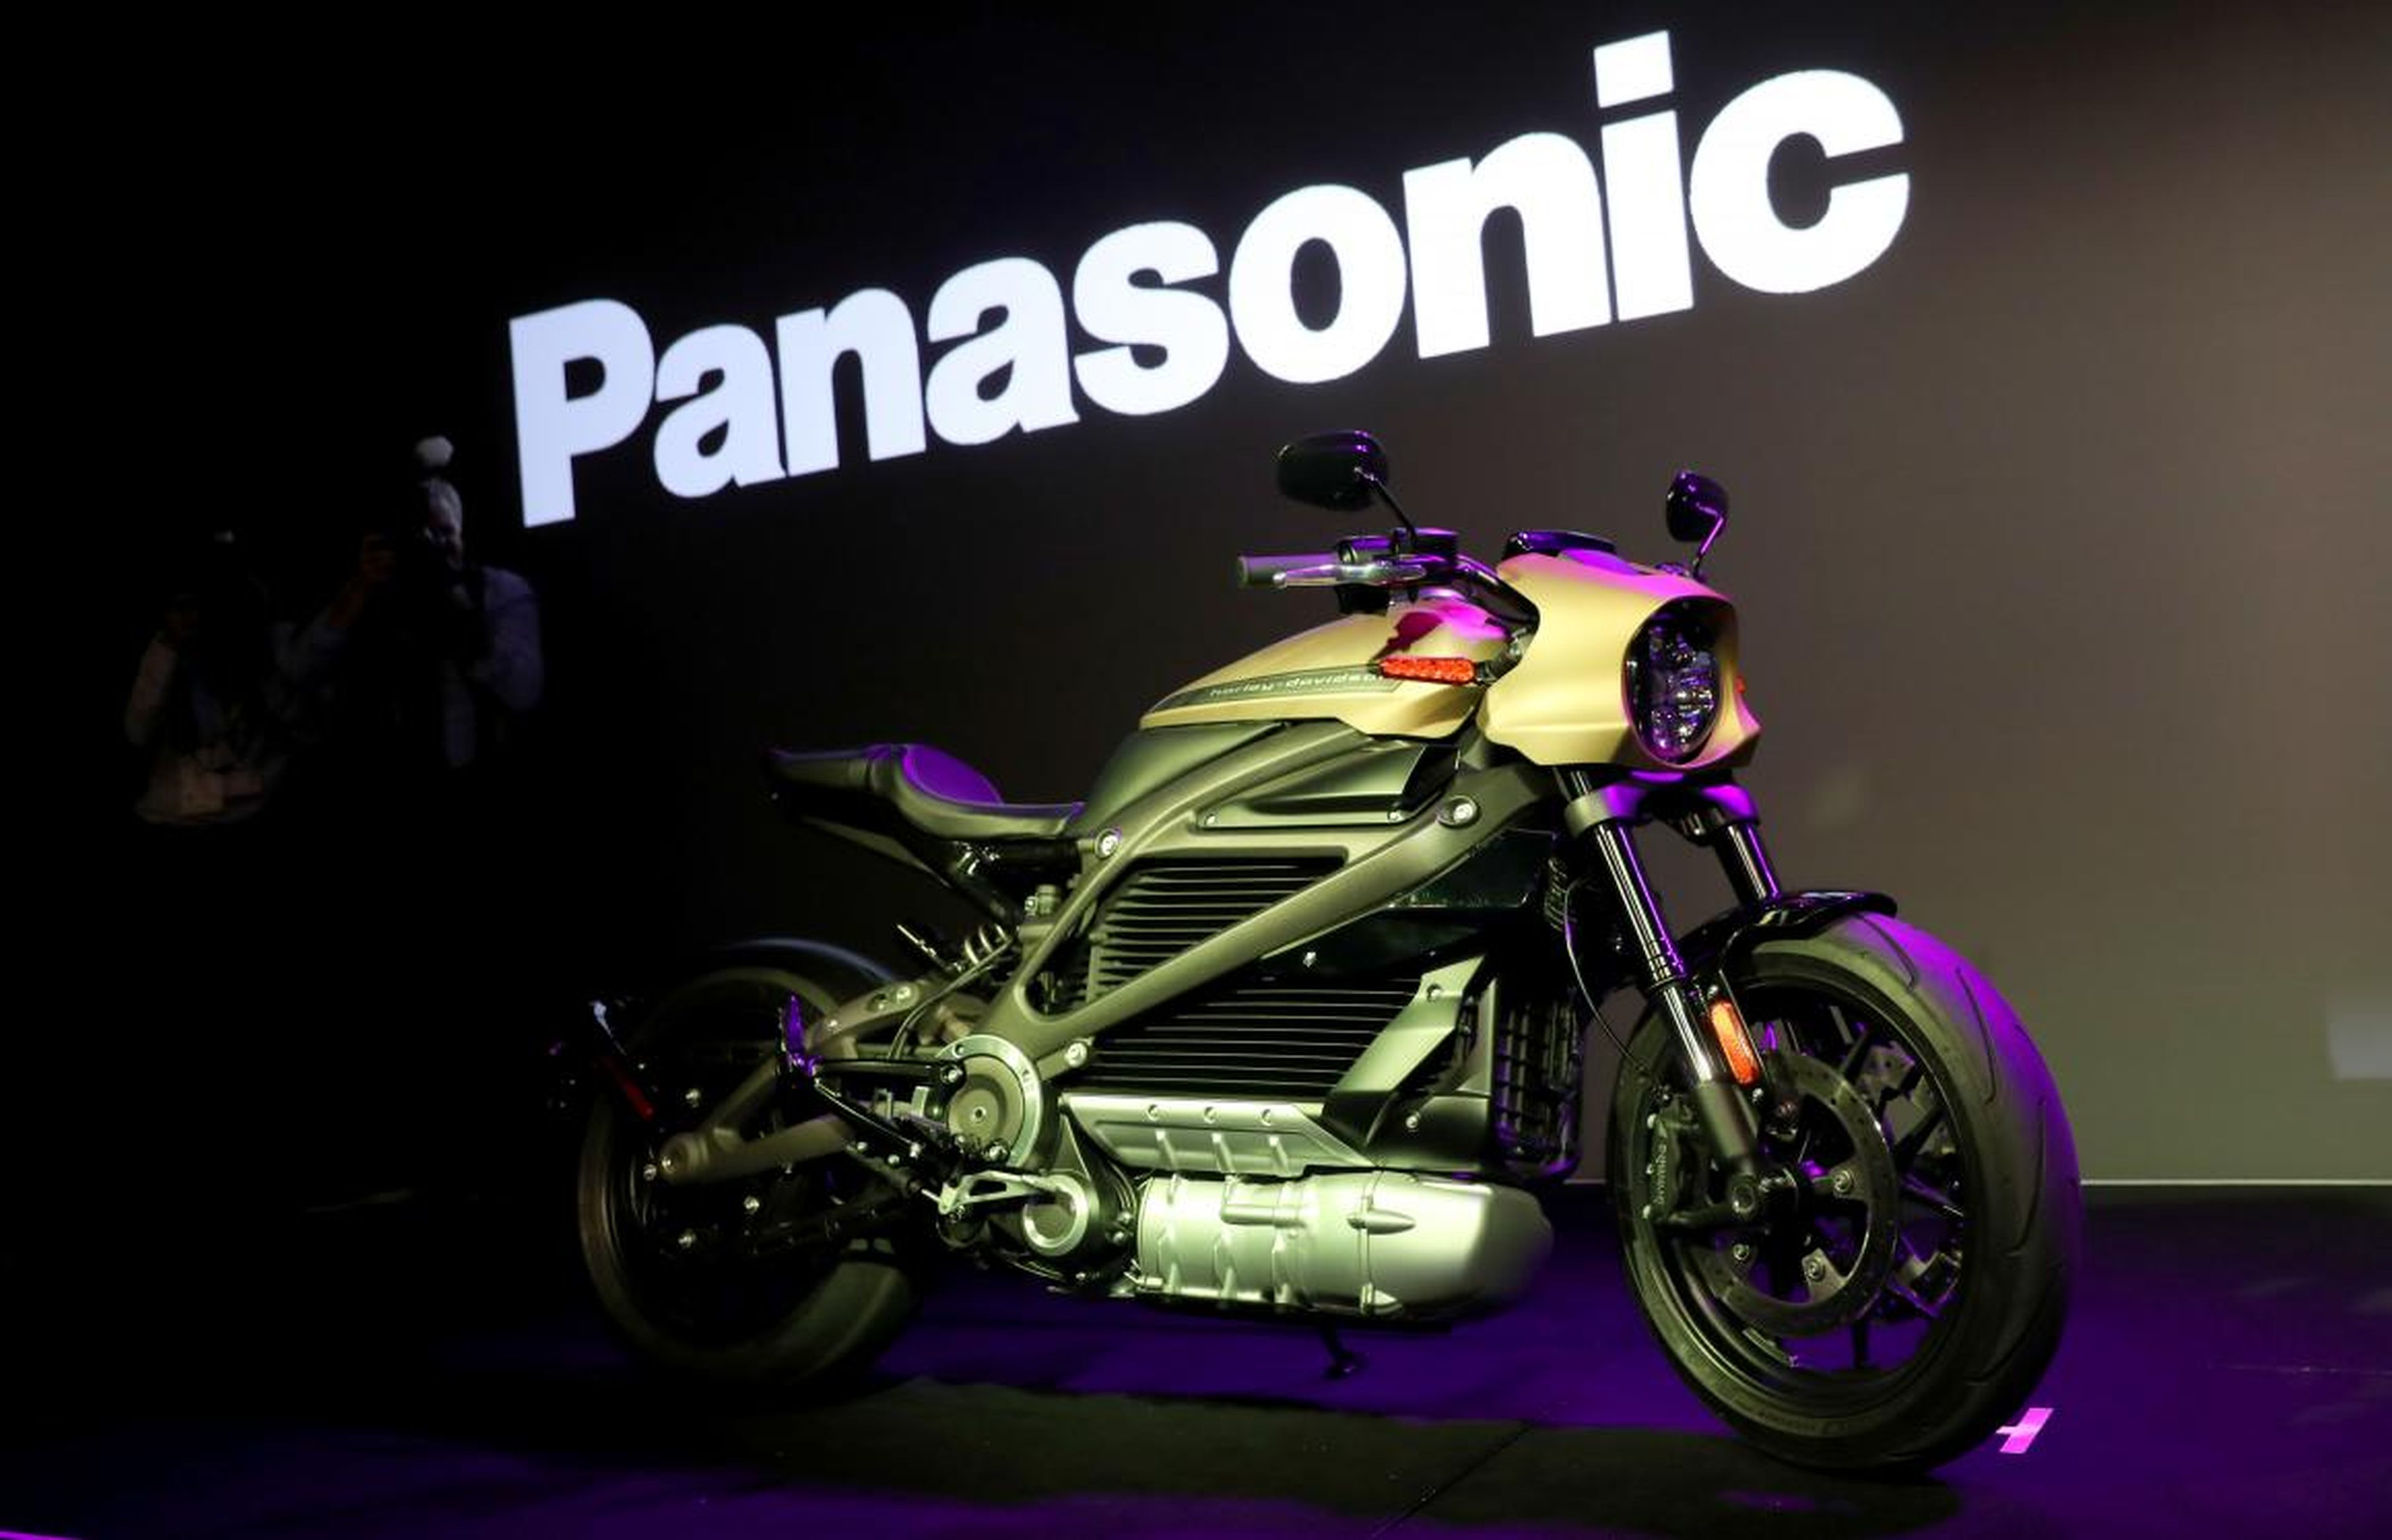 Harley Davidson and Panasonic partnered for a new fully-electric motorcycle.